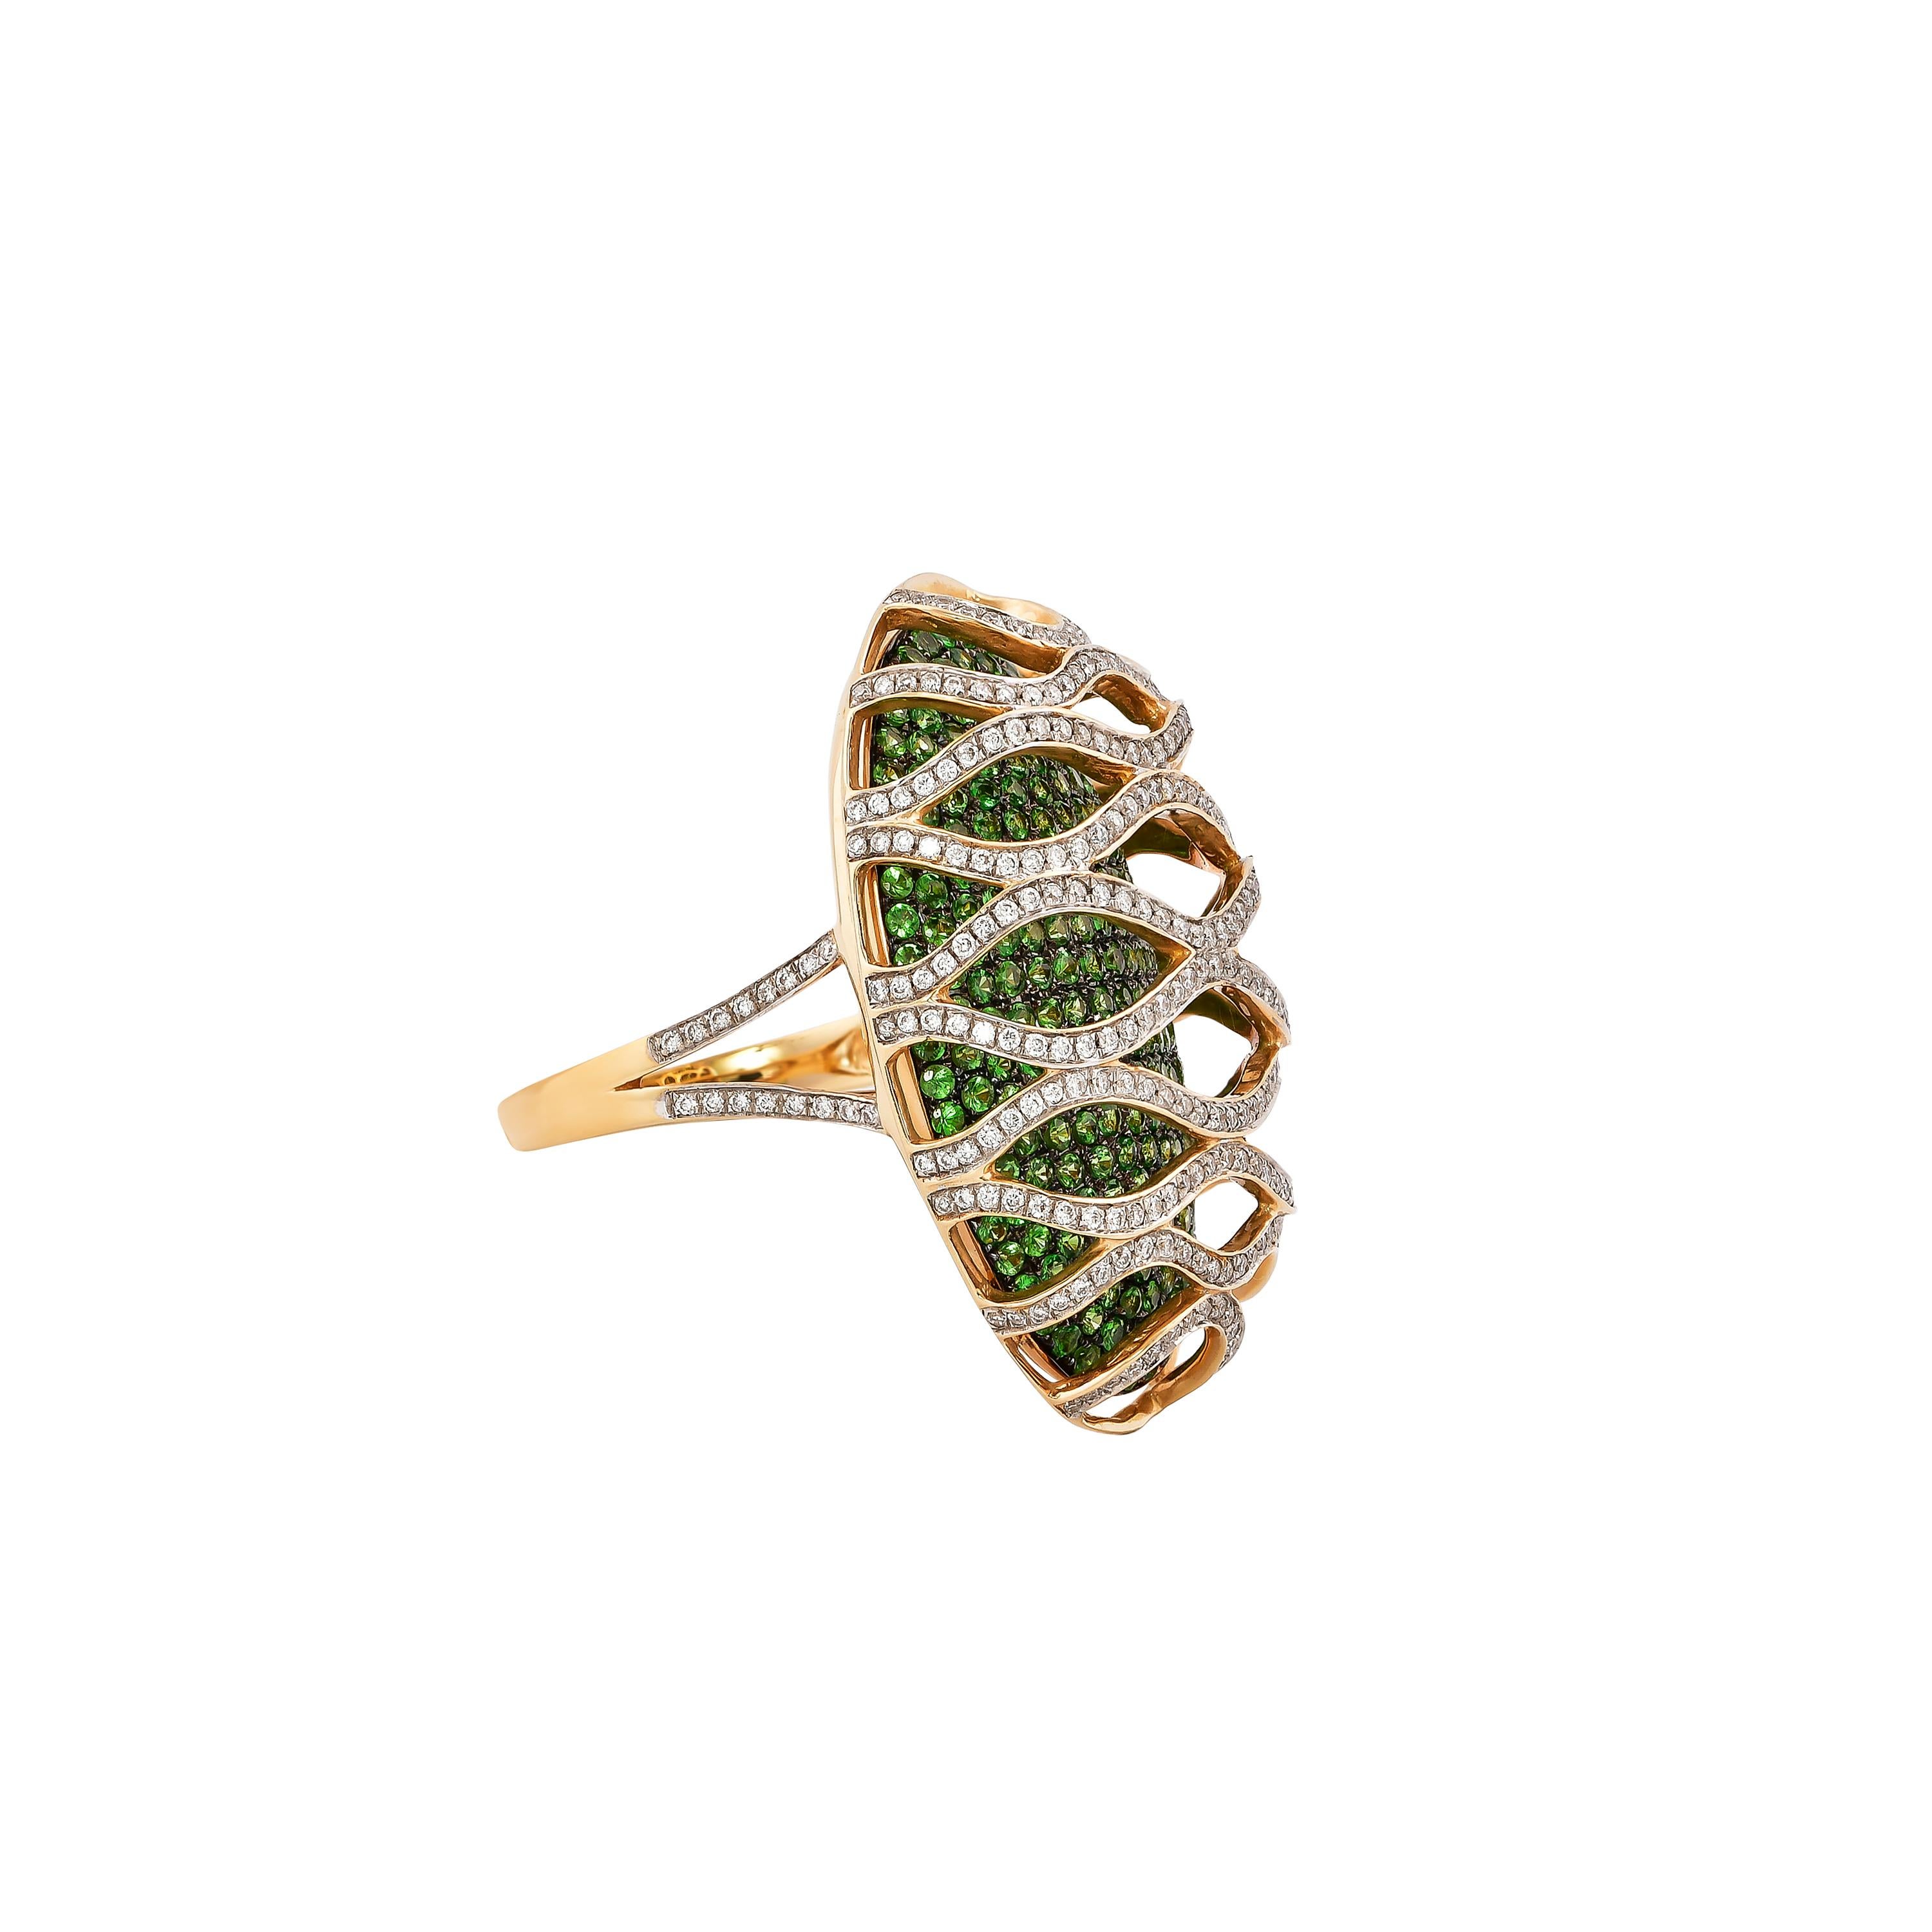 Sunita Nahata presents a collection of fancy cocktail rings with gorgeous gemstones. This ring uses a pave base of tsavorite with an architecturally constructed diamond cage on top. This unique and contrasting design presents a striking cocktail